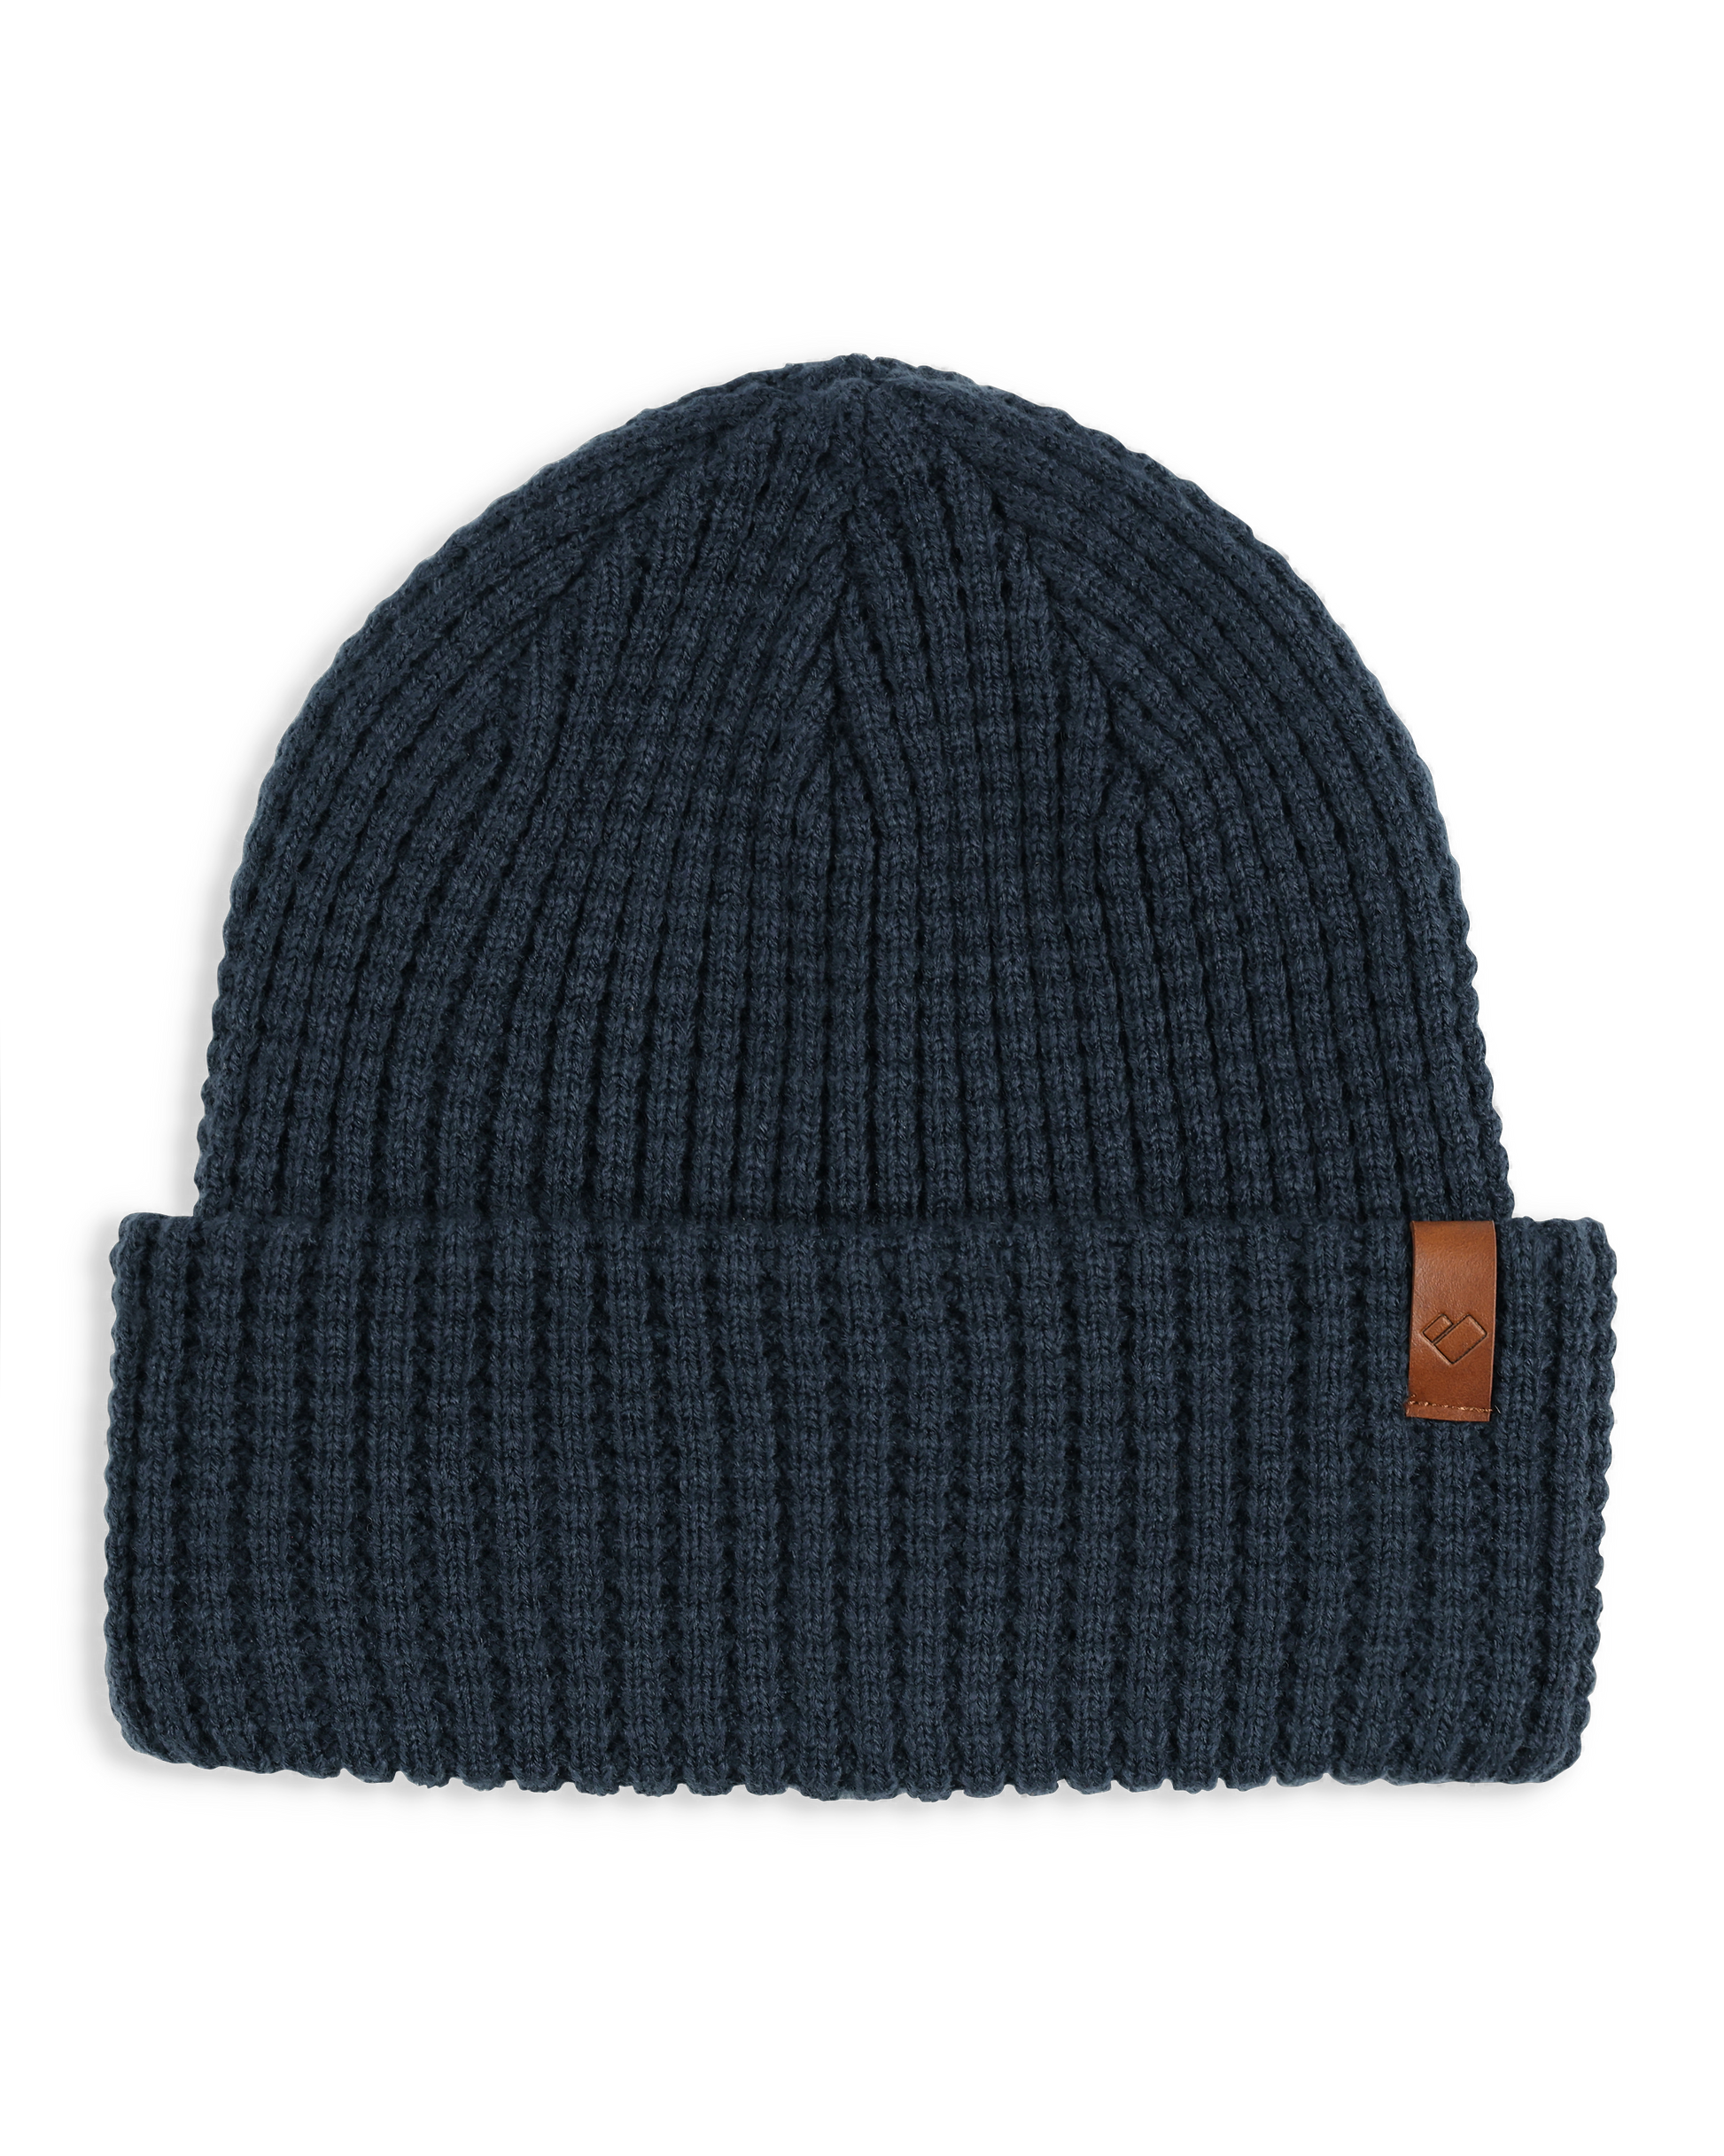 Carhartt mens Fr Fleece 2 in 1 Beanie Hat, Dark Navy, One Size US:  Clothing, Shoes & Jewelry 